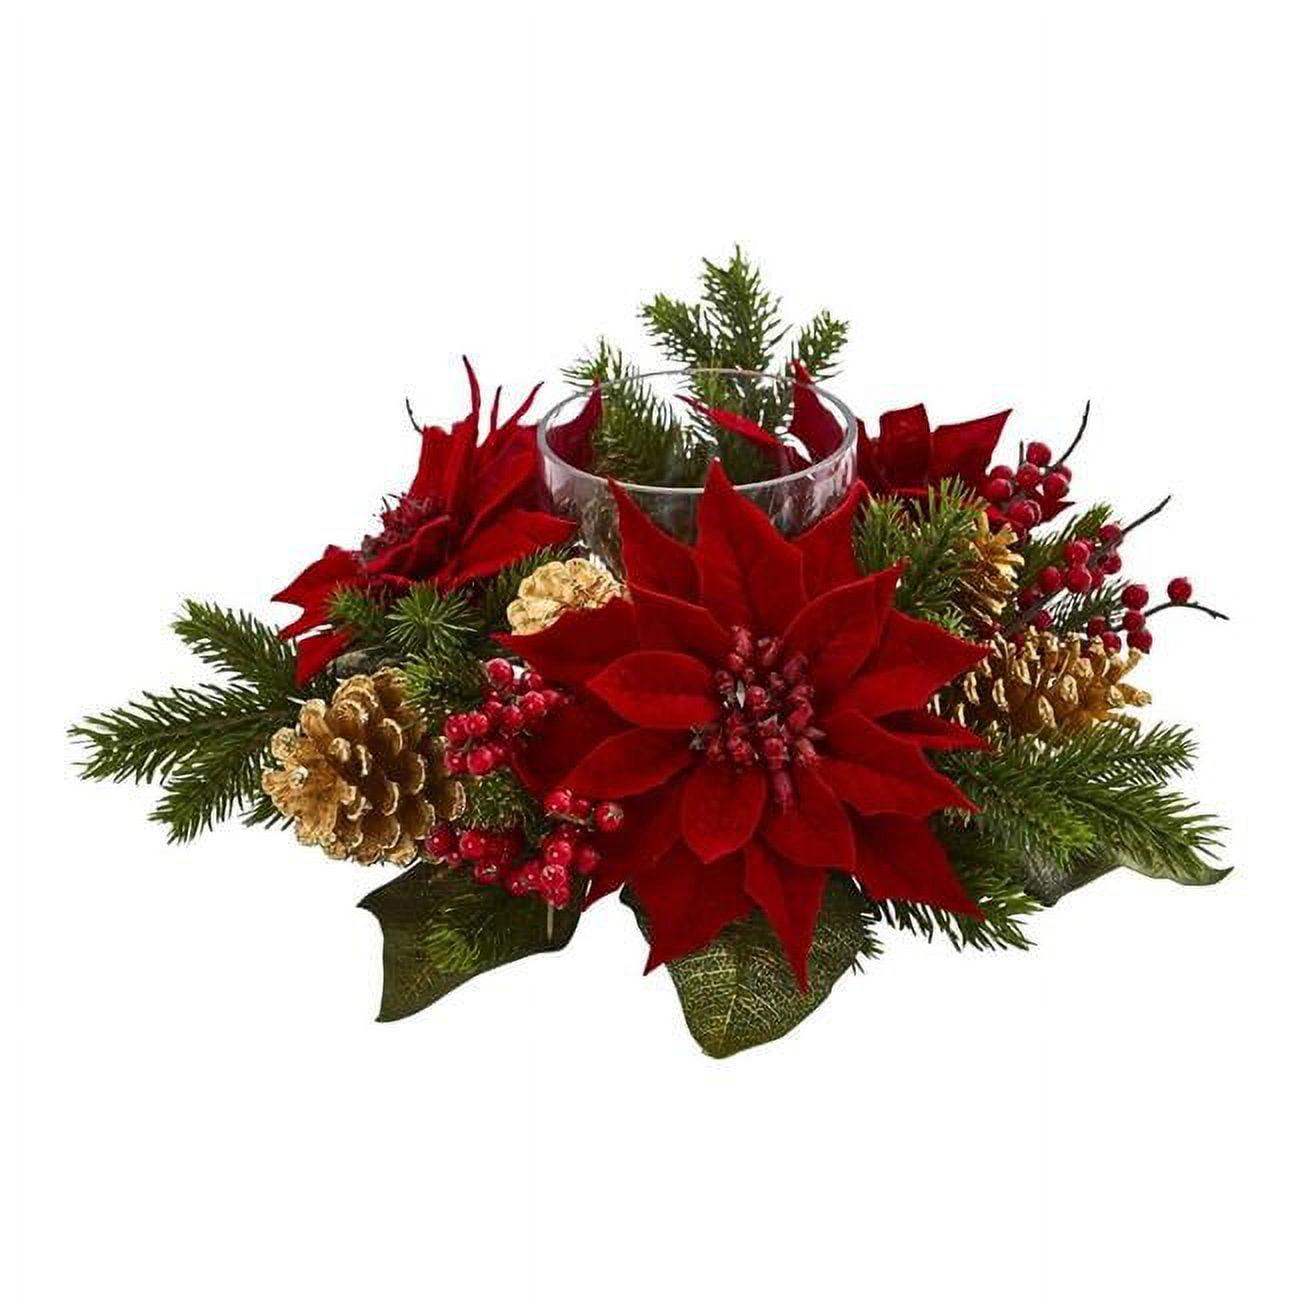 Festive Poinsettia and Pine Cone Tabletop Arrangement in Red